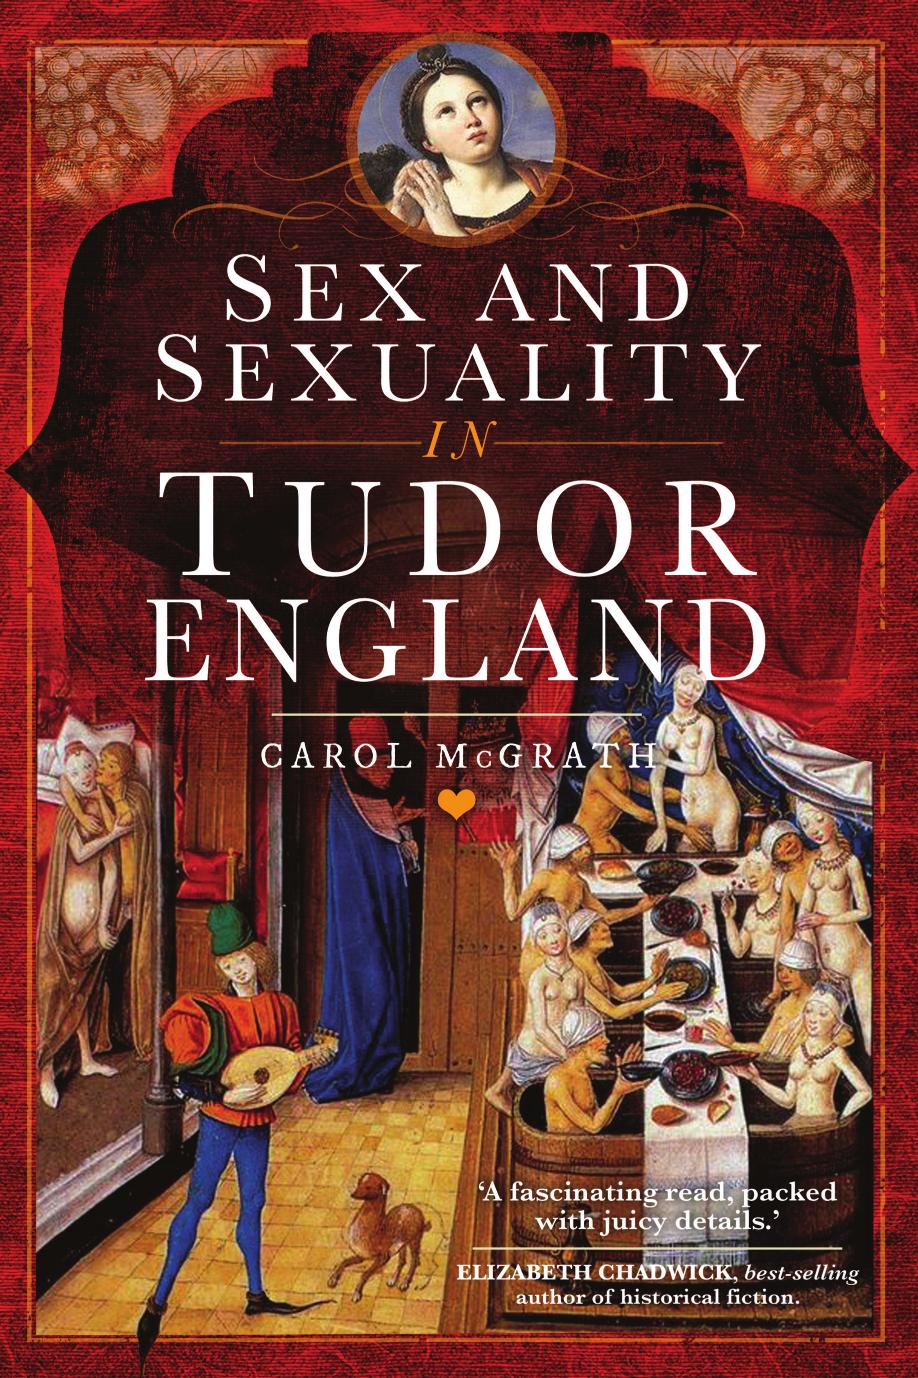 Sex and Sexuality in Tudor England.indd by Carol McGrath